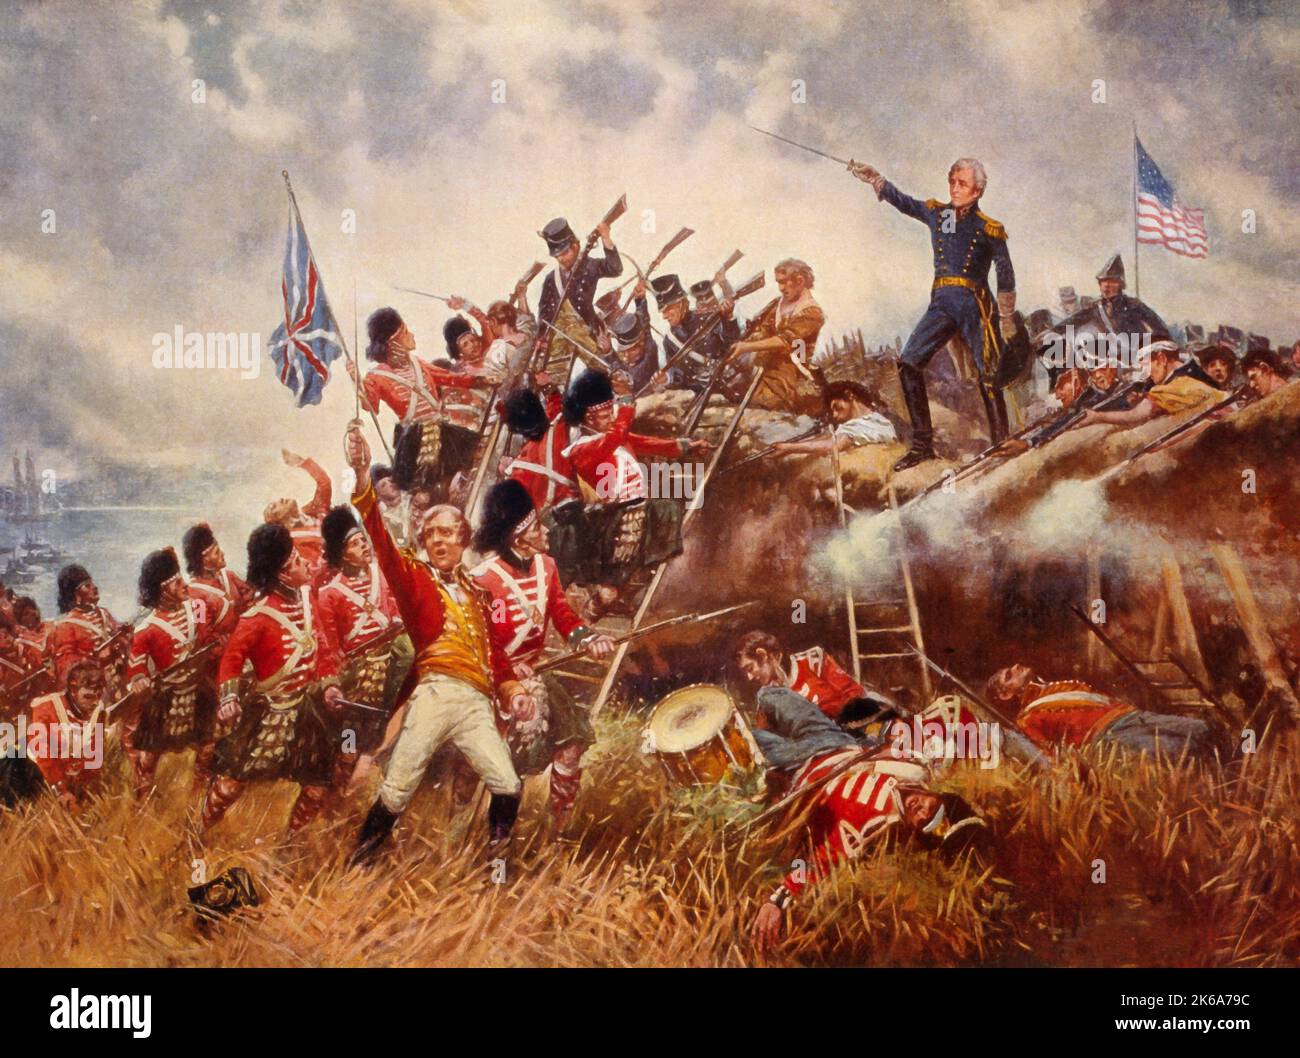 Painting of Andrew Jackson and his troops at the Battle of New Orleans. Stock Photo